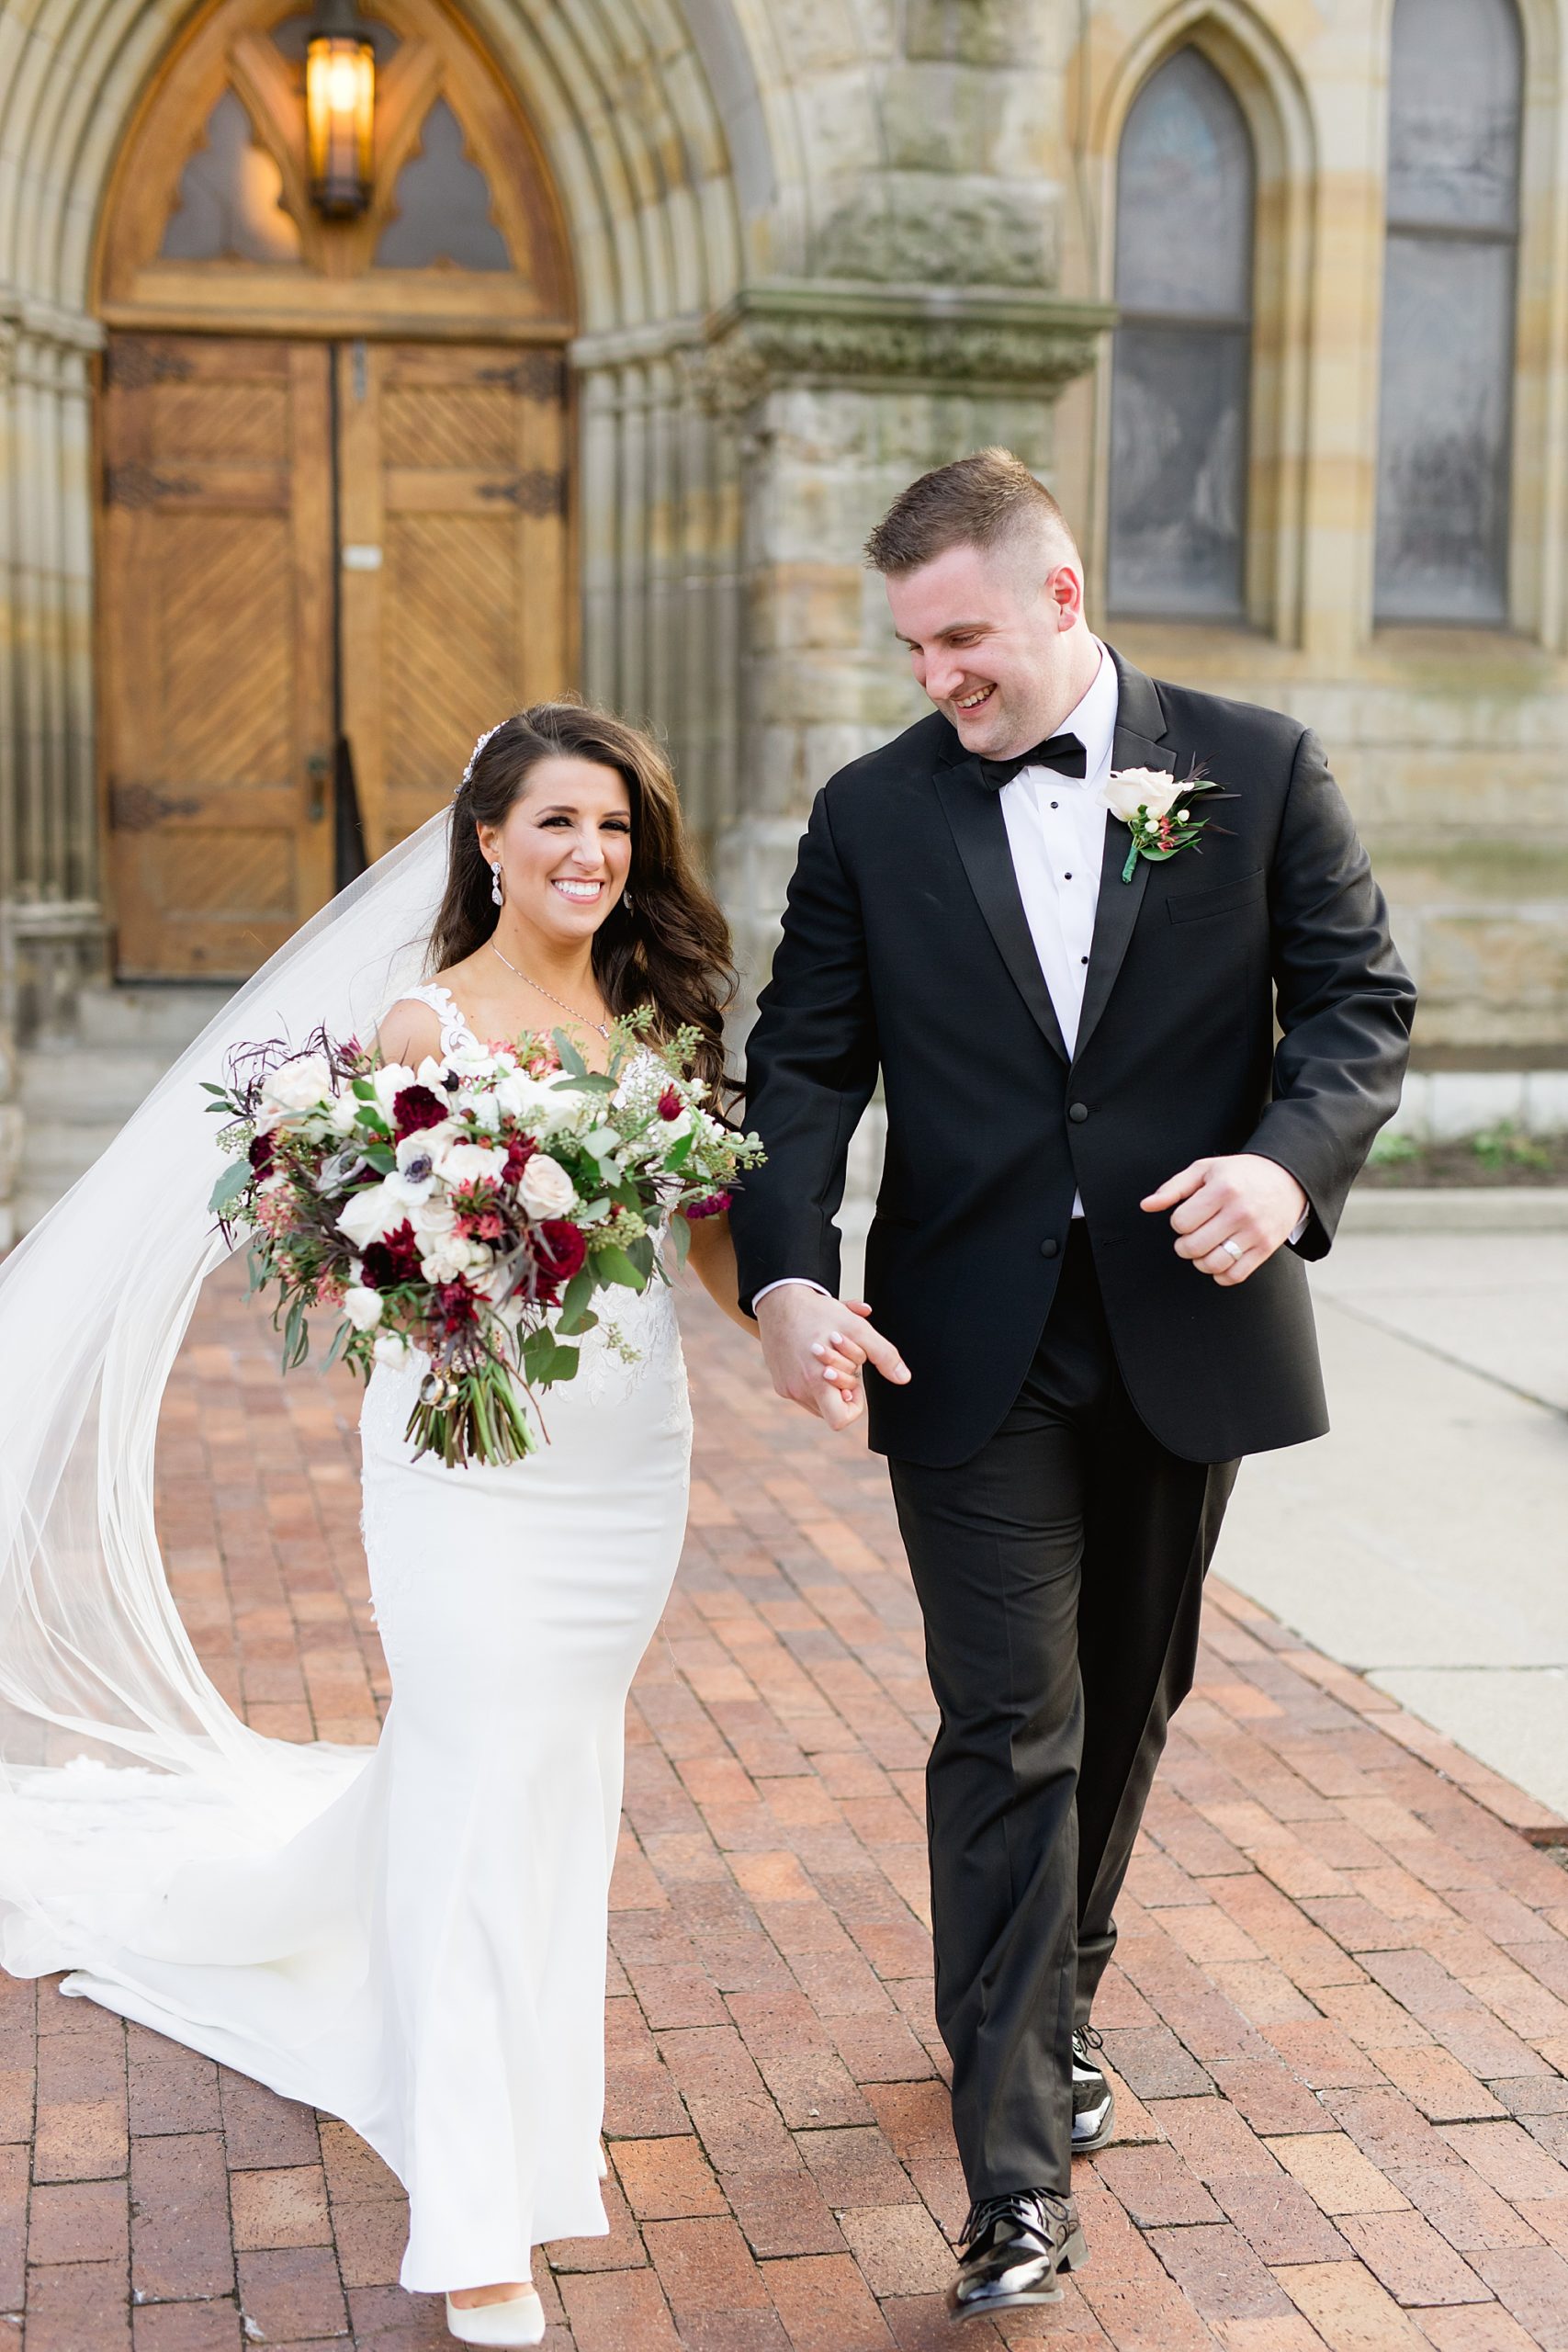 A classic burgundy and evergreen Christmas wedding at the Colony Club Detroit by Breanne Rochelle Photography.